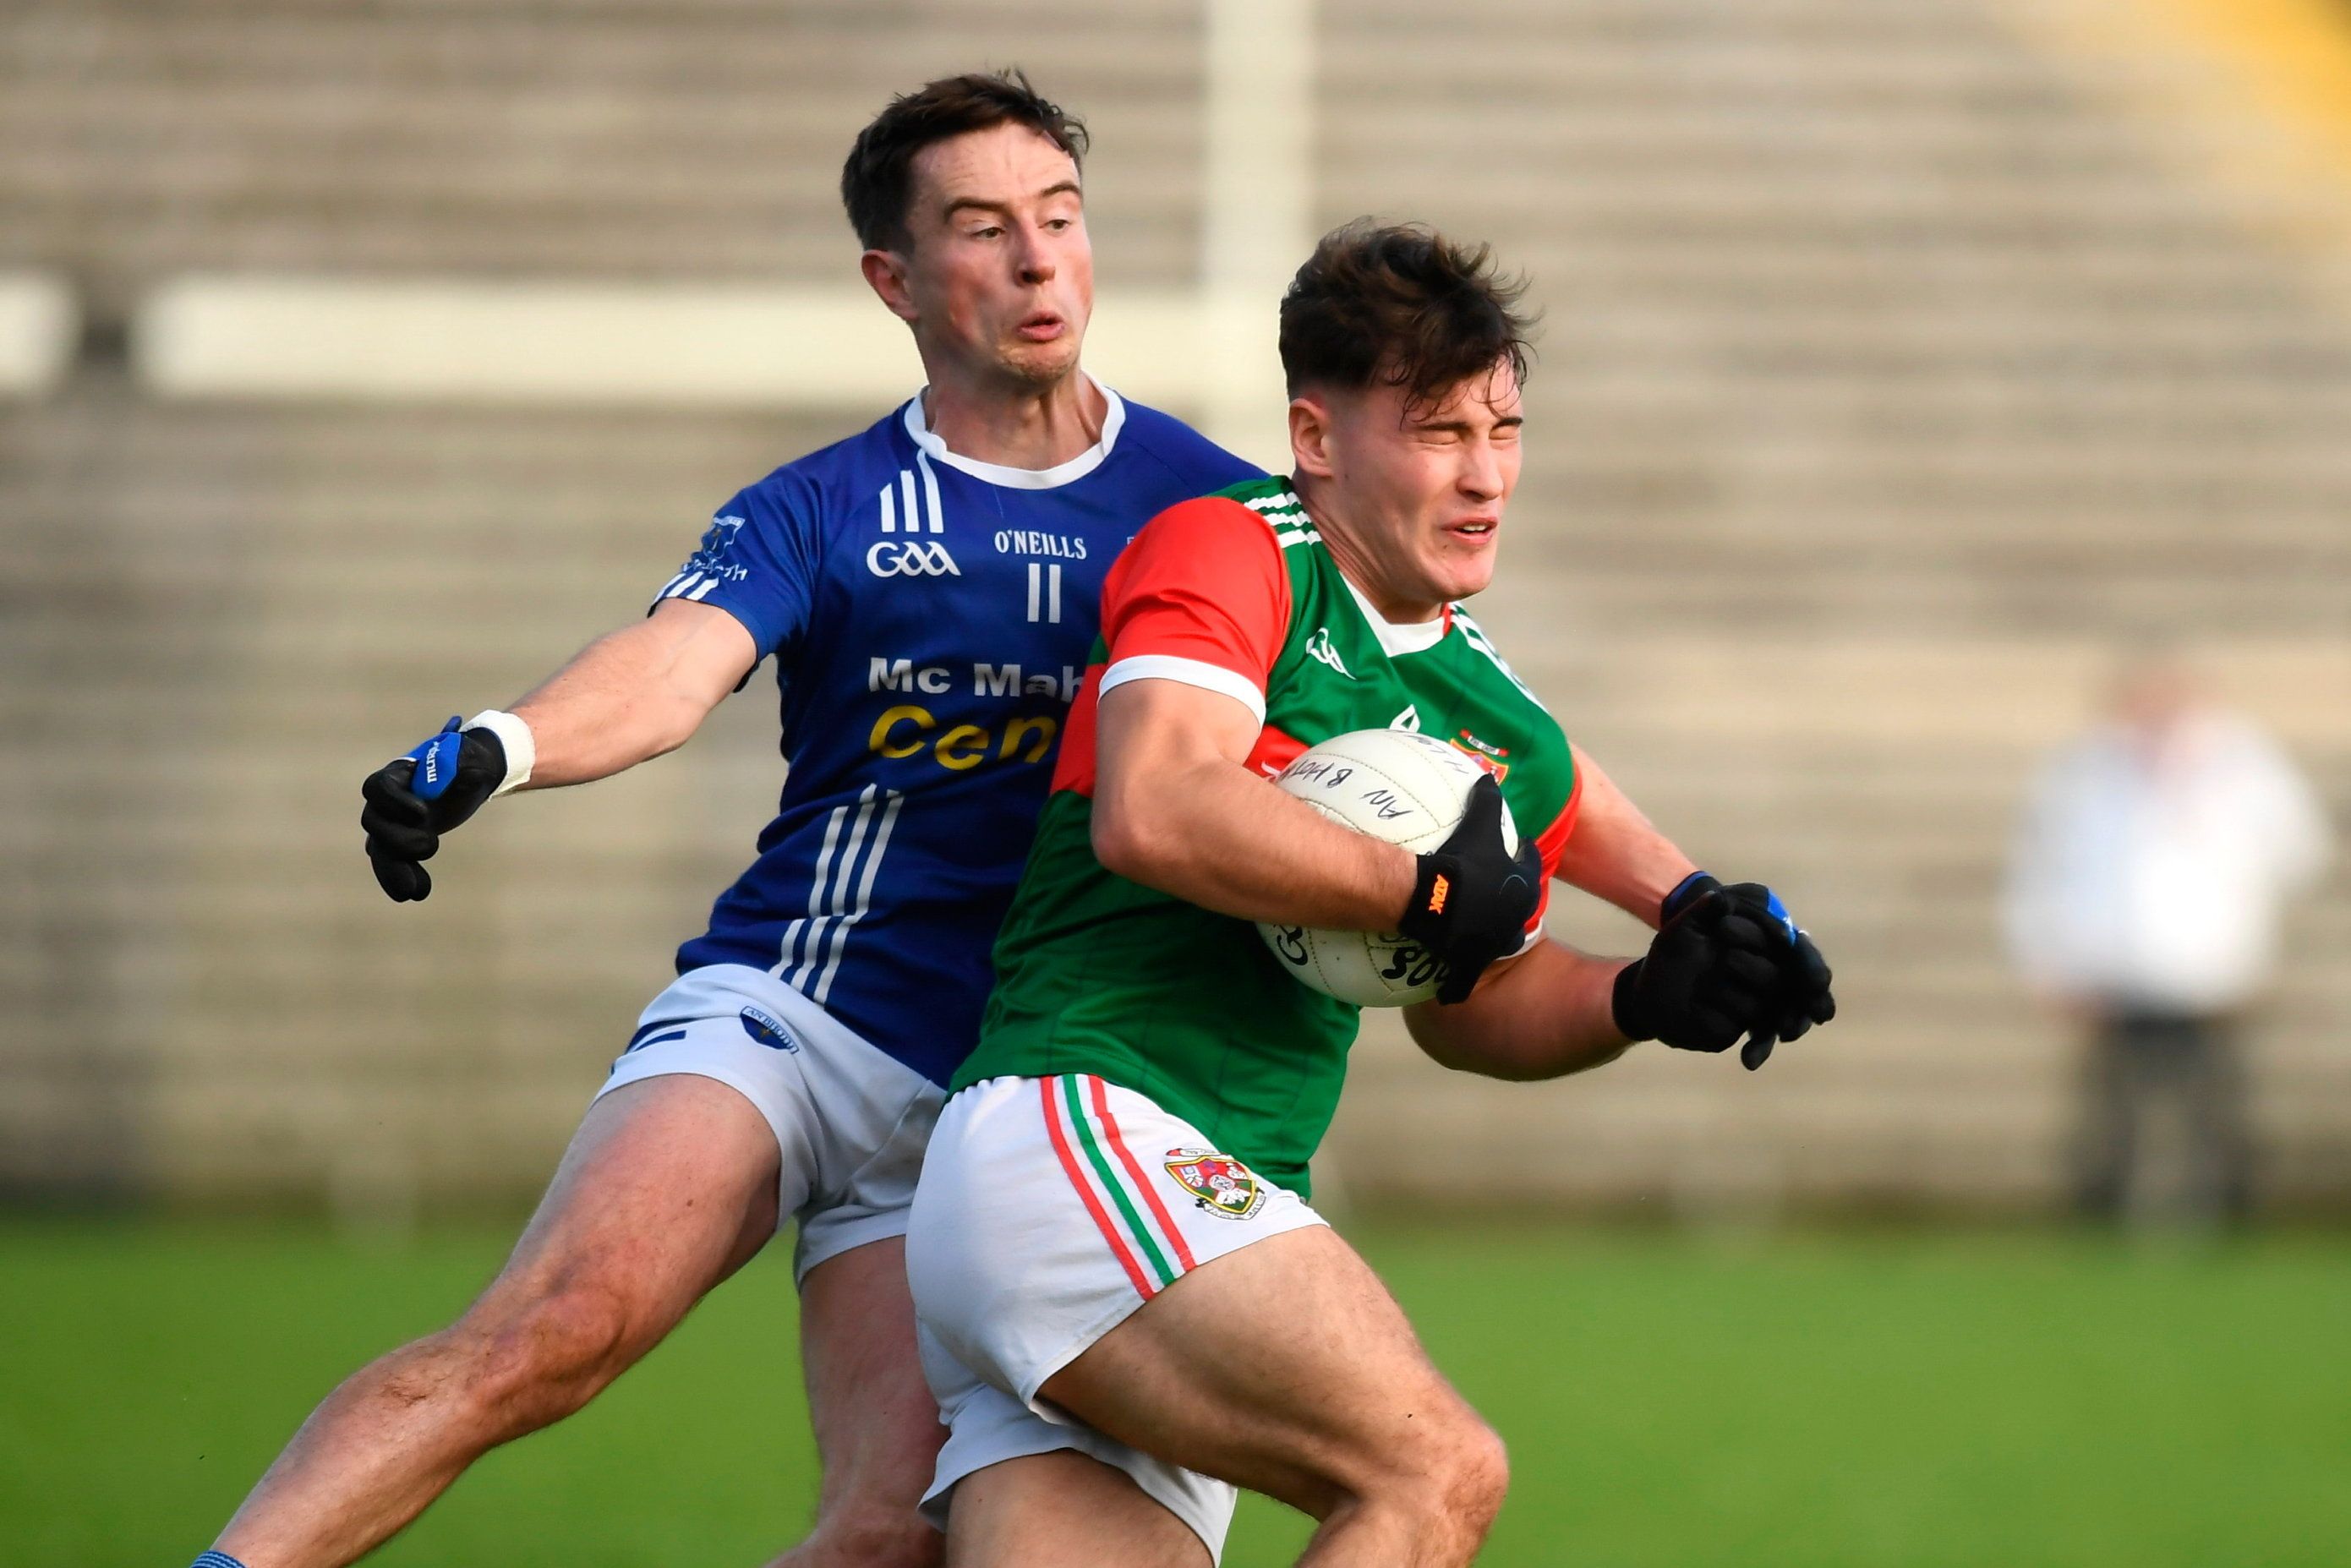 Monaghan SFC final: Jack McCarron on song as Scotstown reclaim